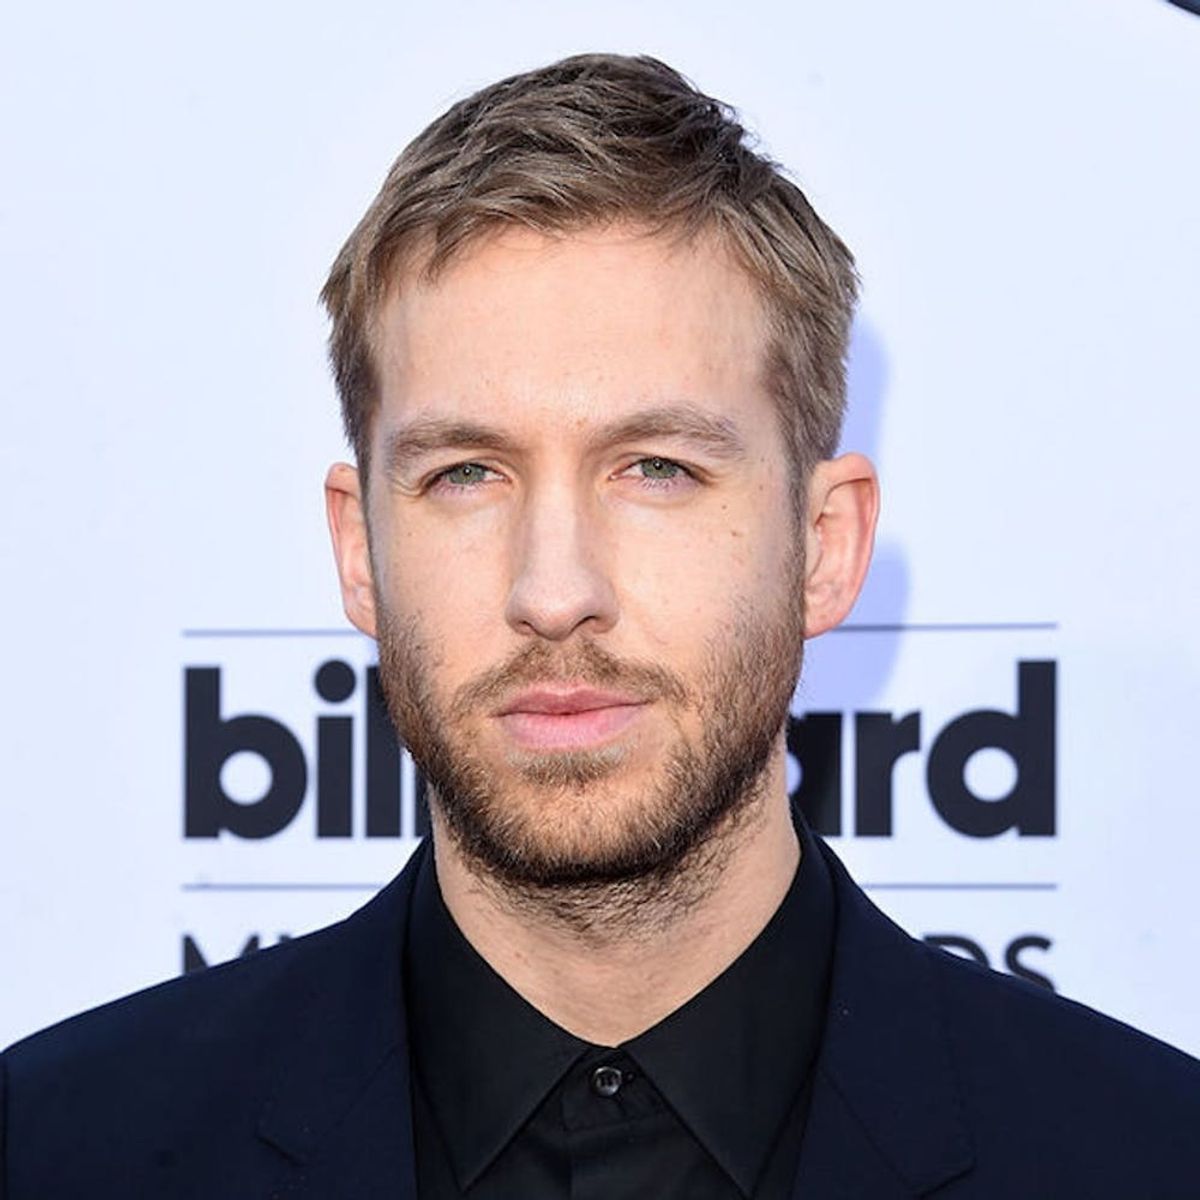 Morning Buzz! Katy Perry Is on Calvin Harris’s New Album and Taylor Swift Fans Can’t Handle the Pettiness + More